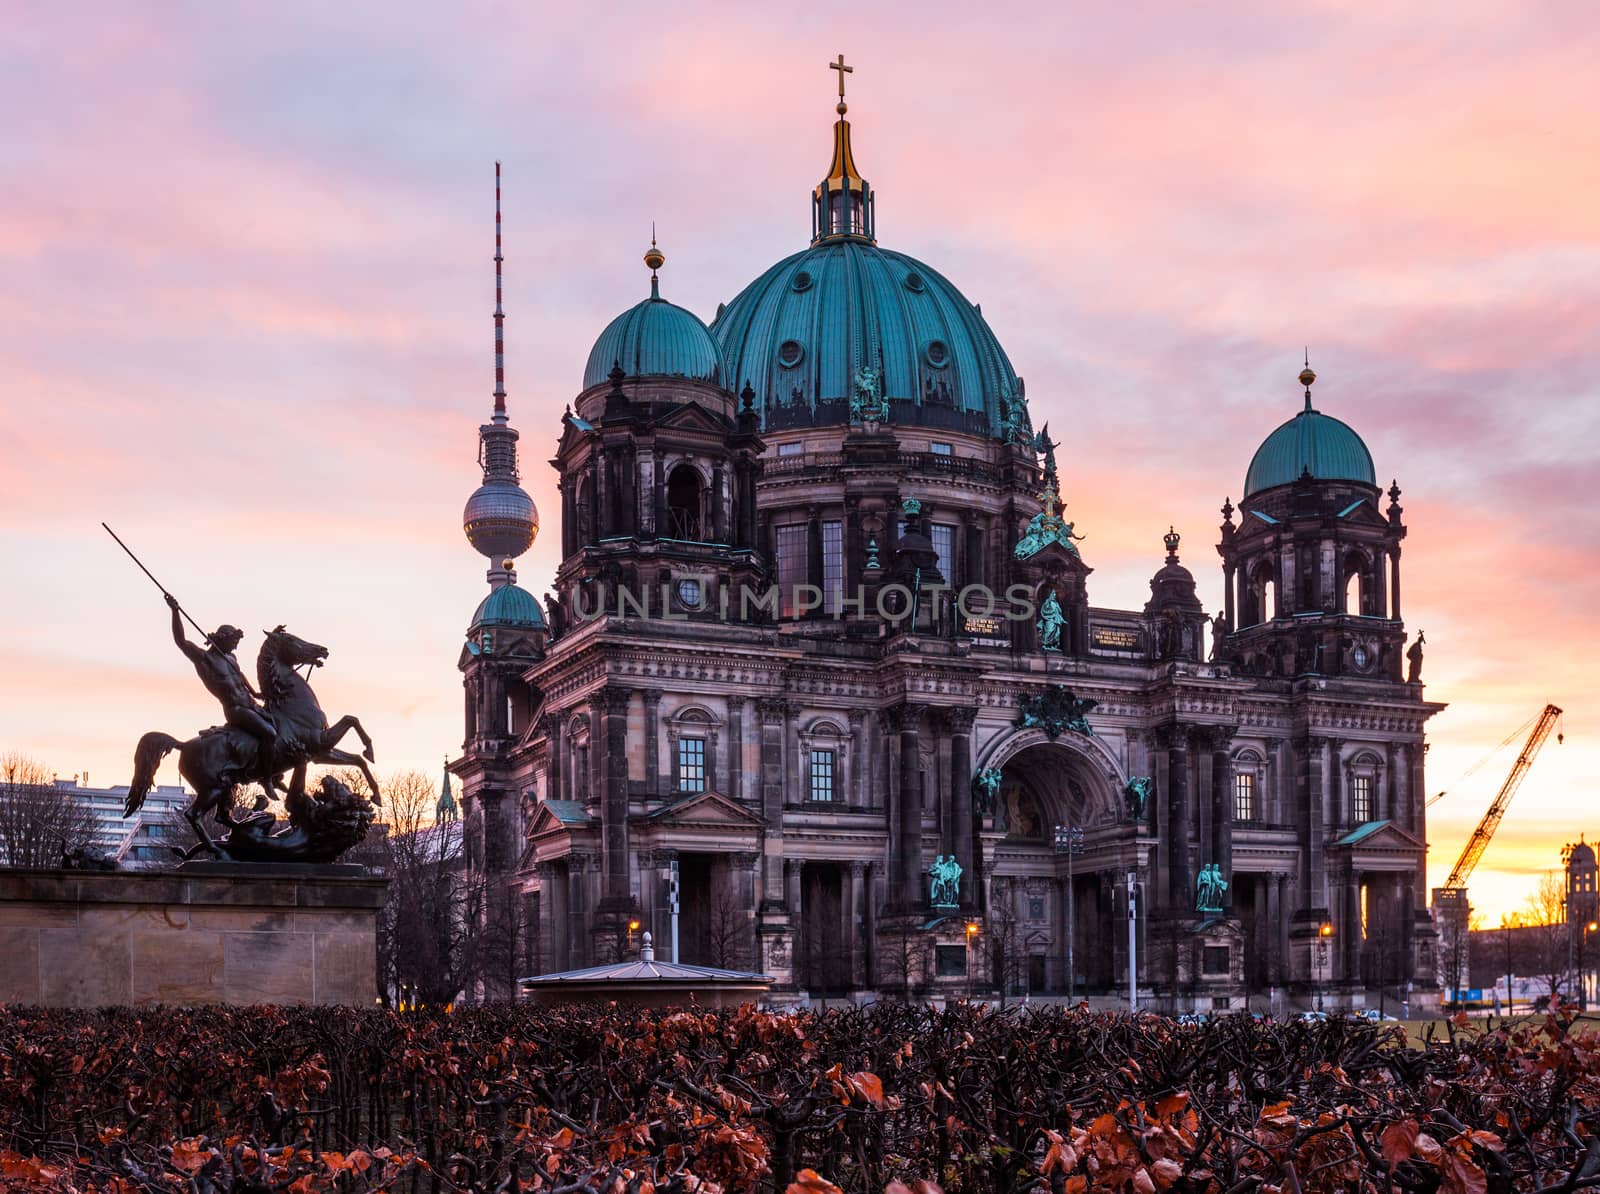 The Protestant Berlin Cathedral (Berliner Dom), Germany